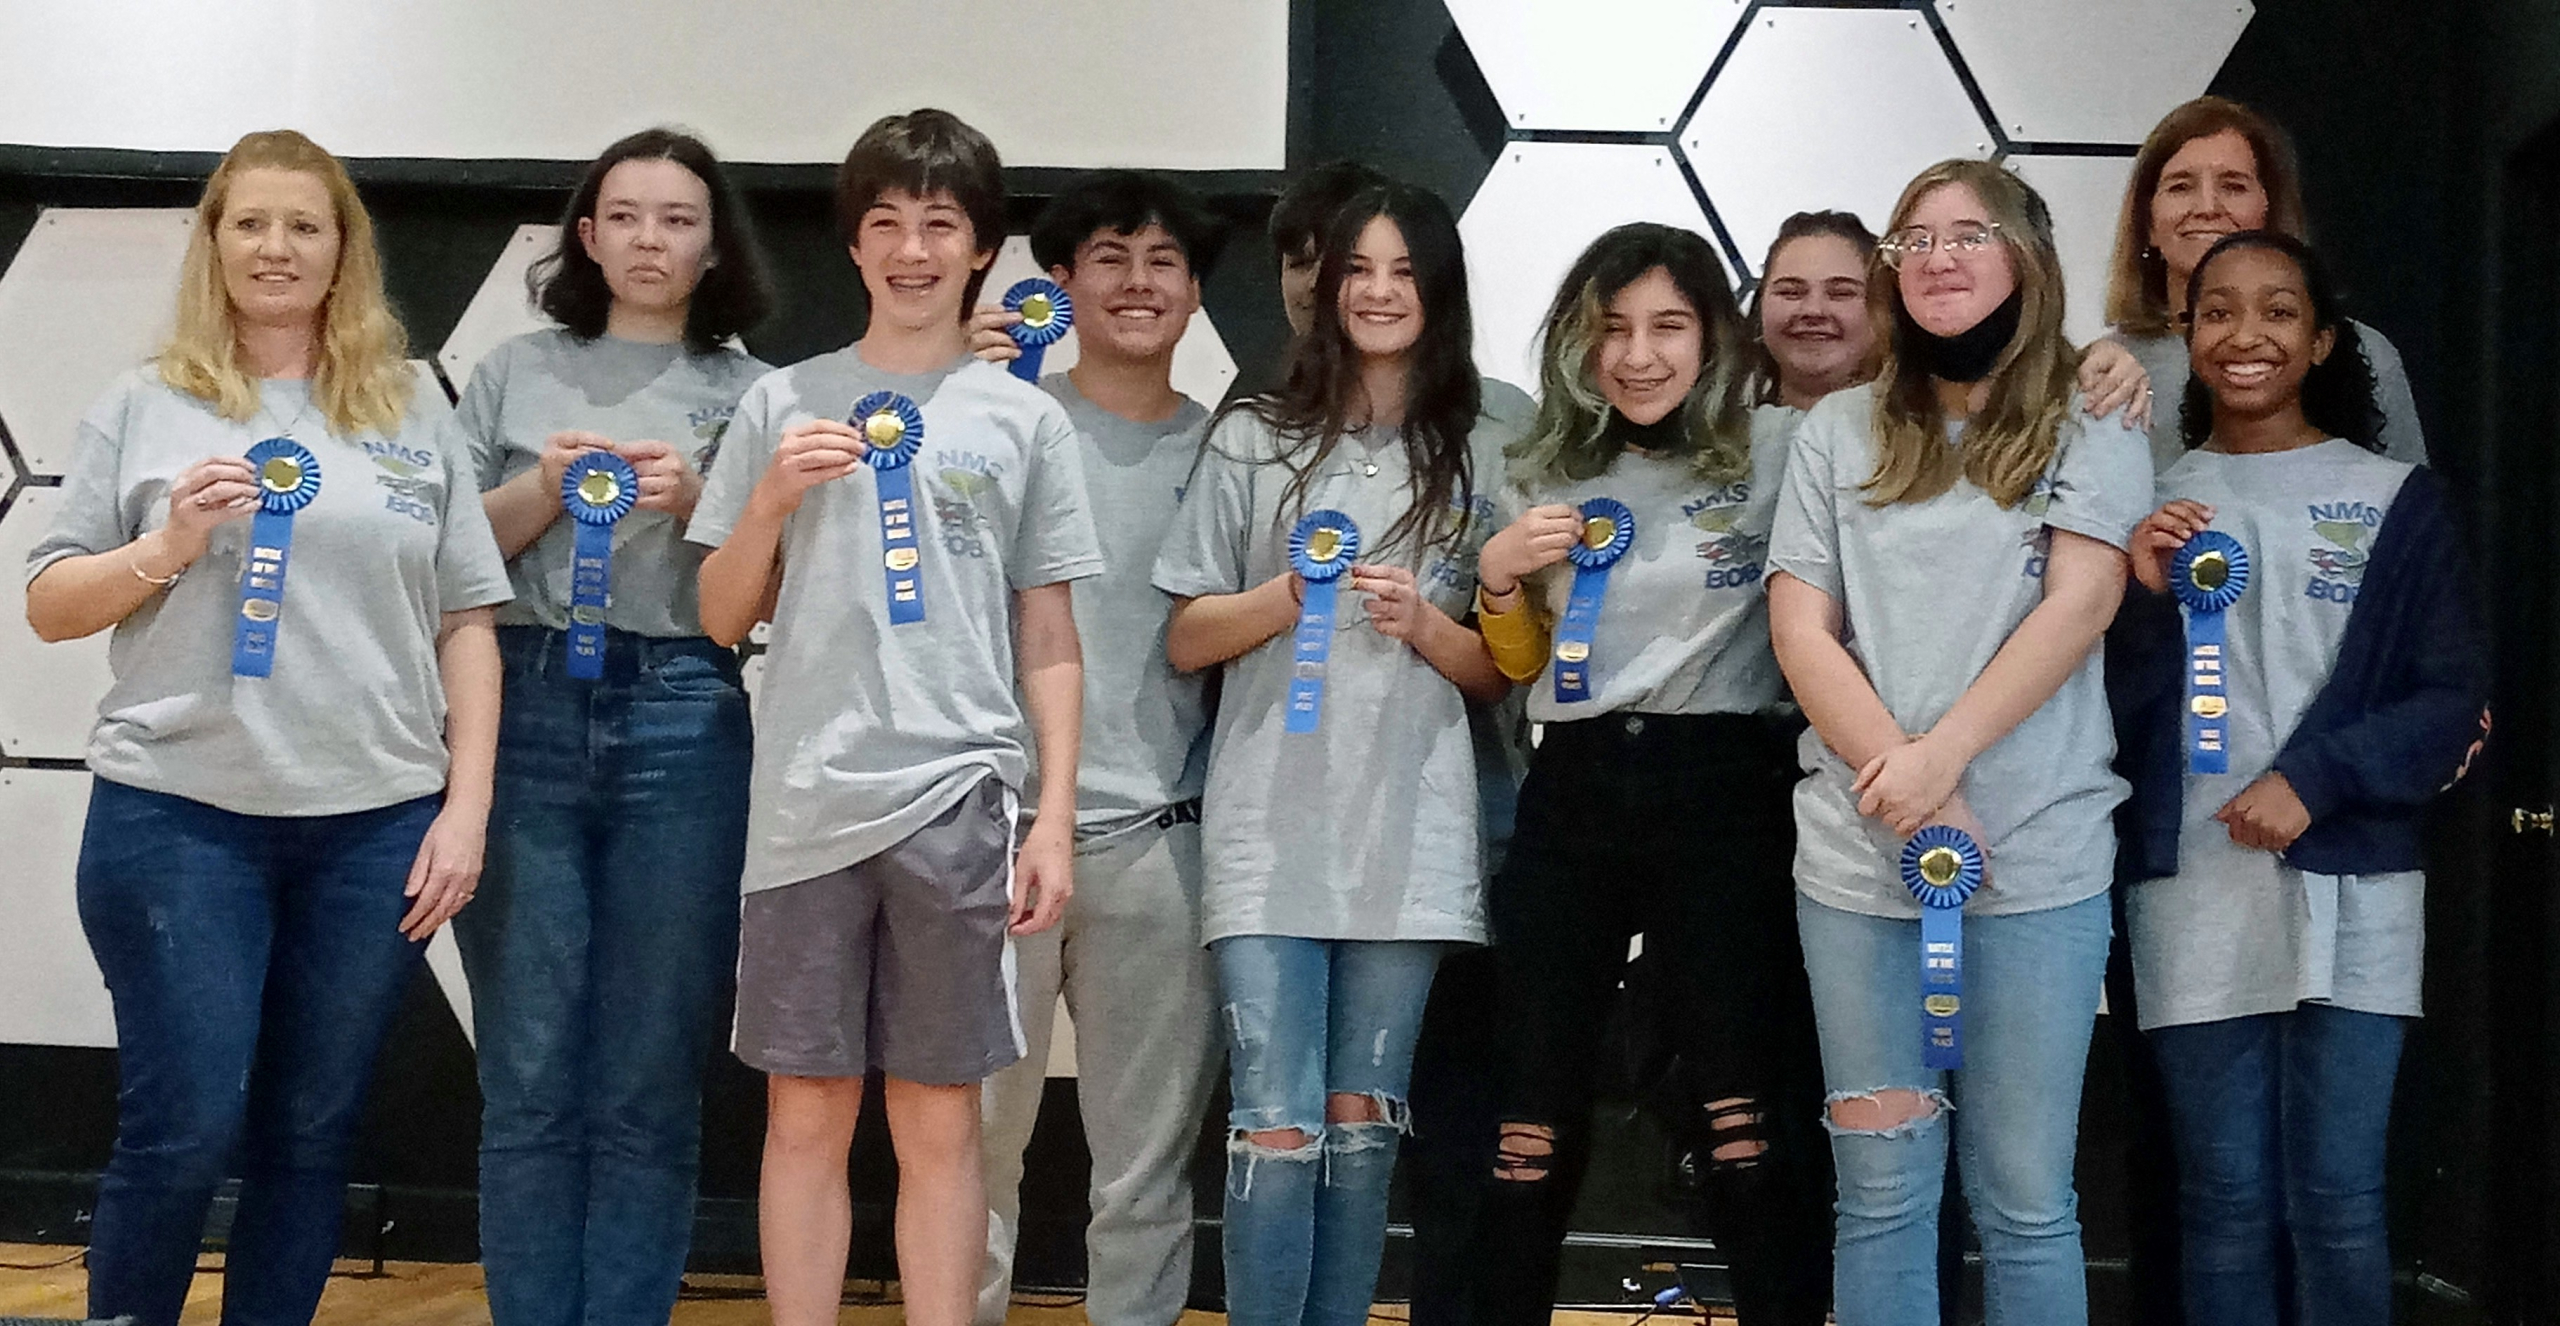 Norwayne Middle Students Win District “Battle of the Books” Competition